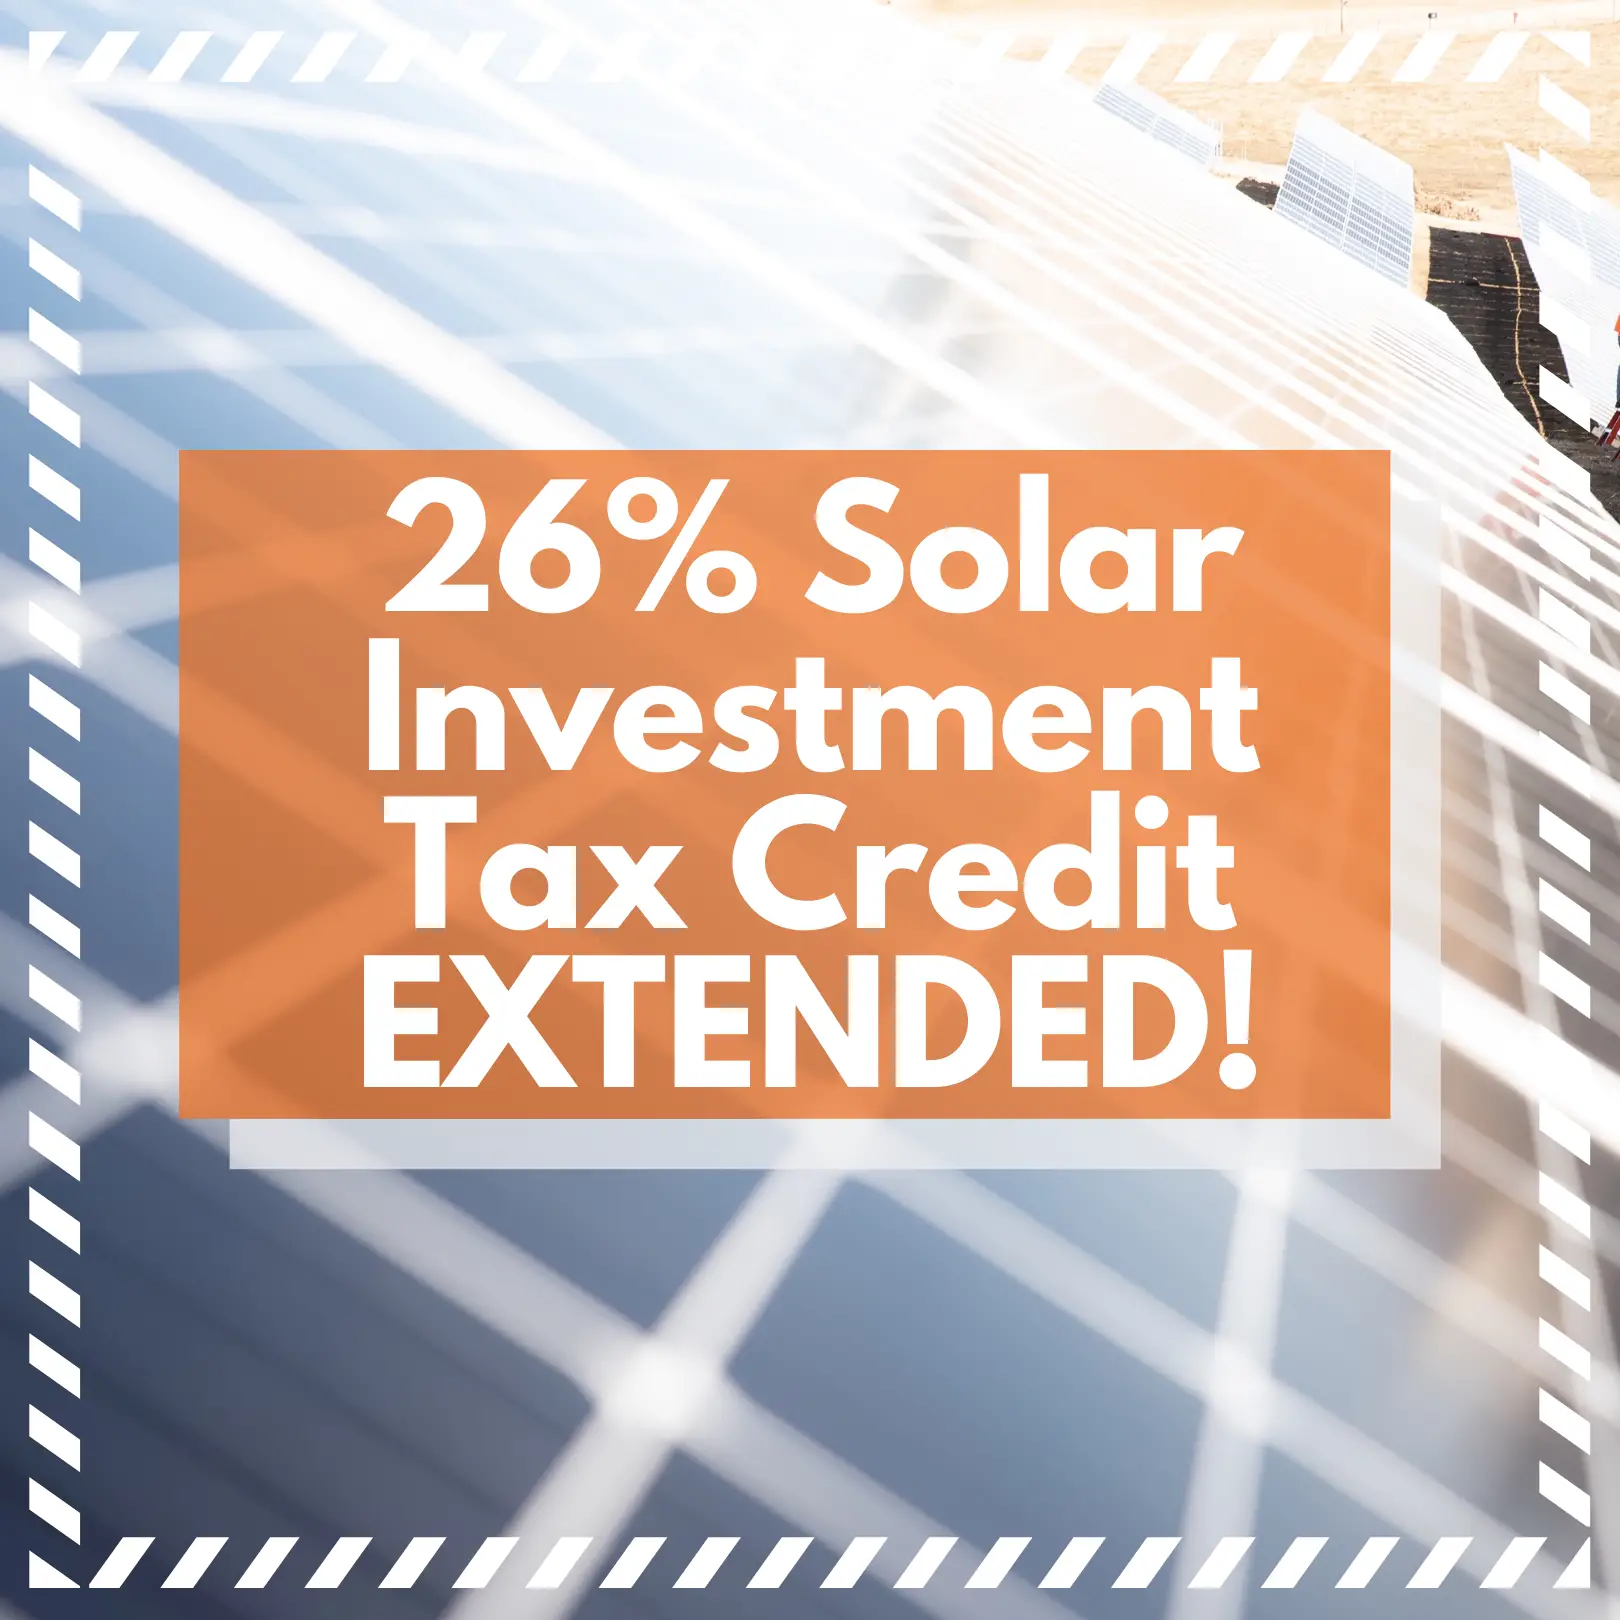 Federal Government Extends Solar Investment Tax Credit for 2 Years ...